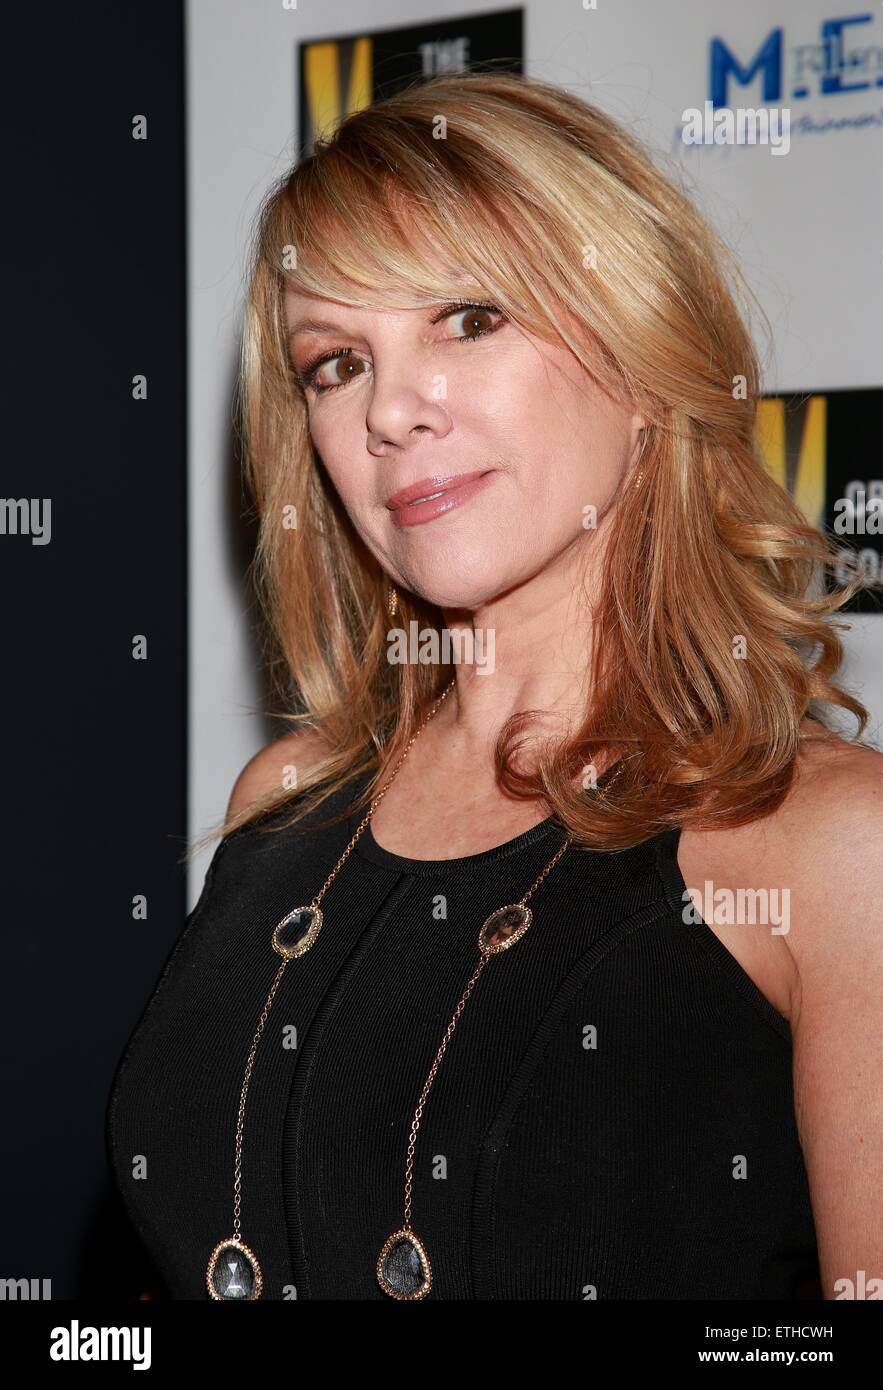 New York premiere party of 'Cop Show' at Caroline's On Broadway Comedy Club - Arrivals  Featuring: Ramona Singer Where: New York, New York, United States When: 24 Feb 2015 Credit: Joseph Marzullo/WENN.com Stock Photo